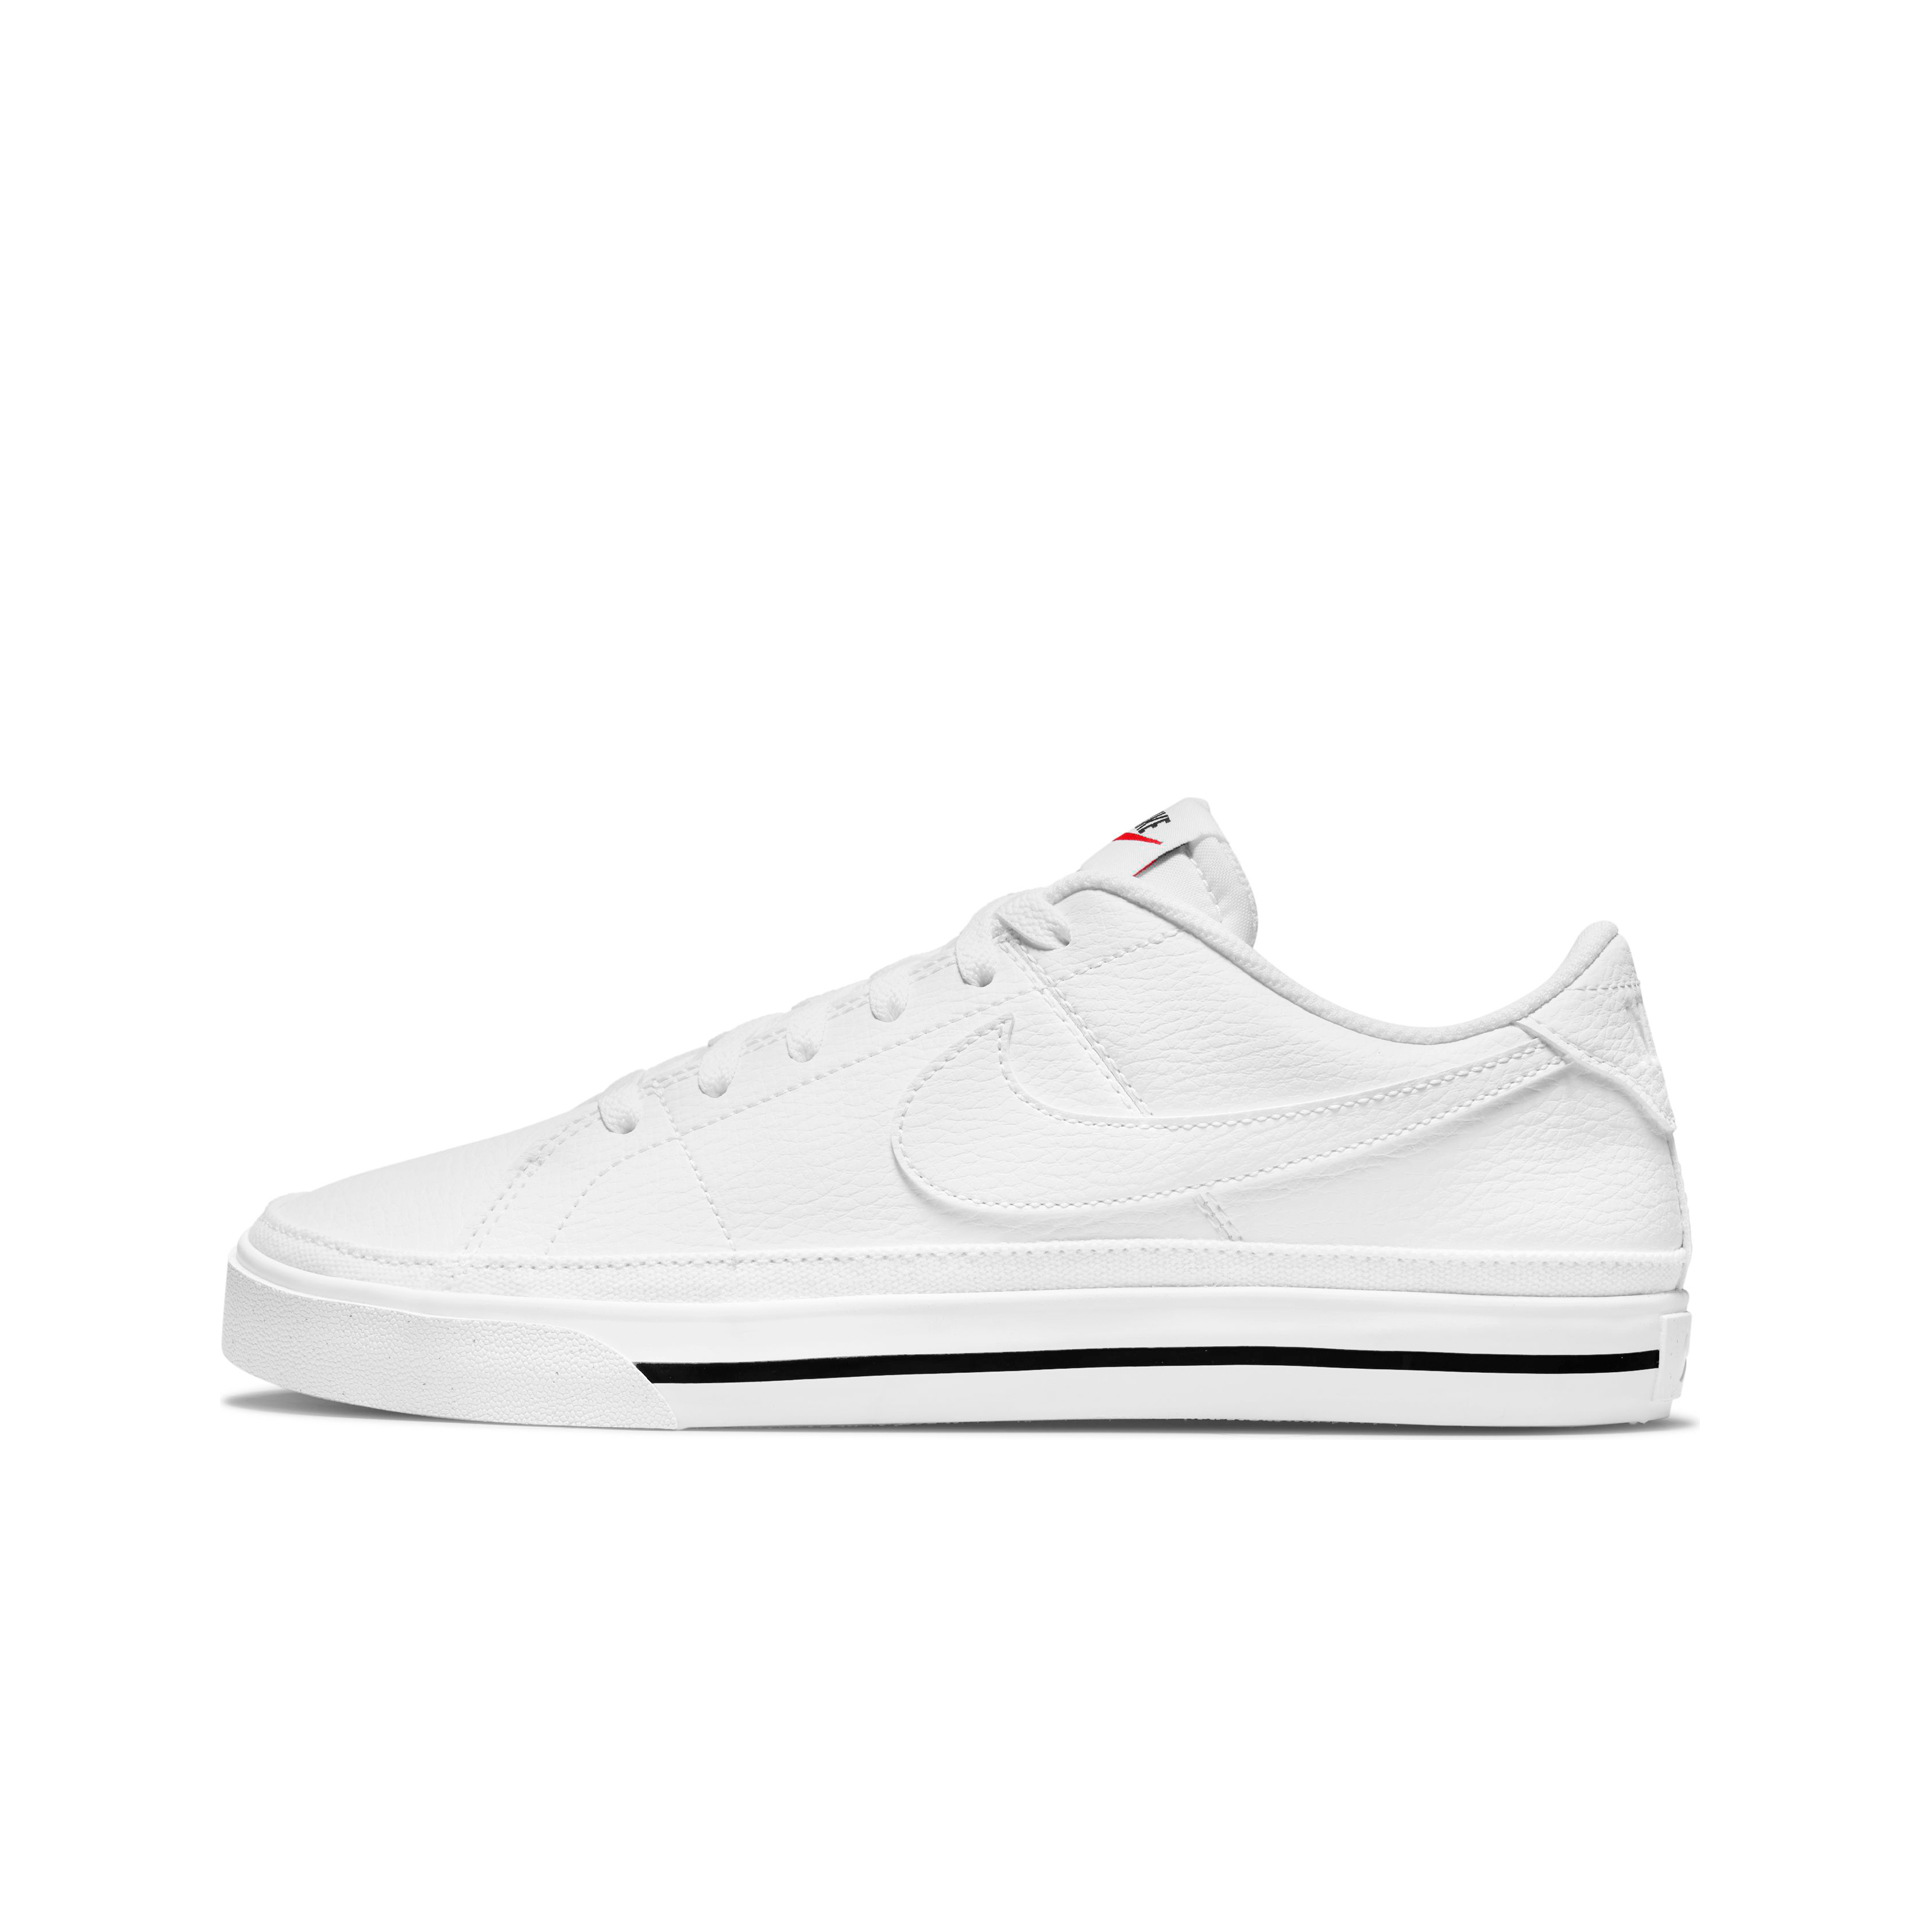 Nike Zapatillas Mujer WMNS NIKE COURT LEGACY NN lateral interior